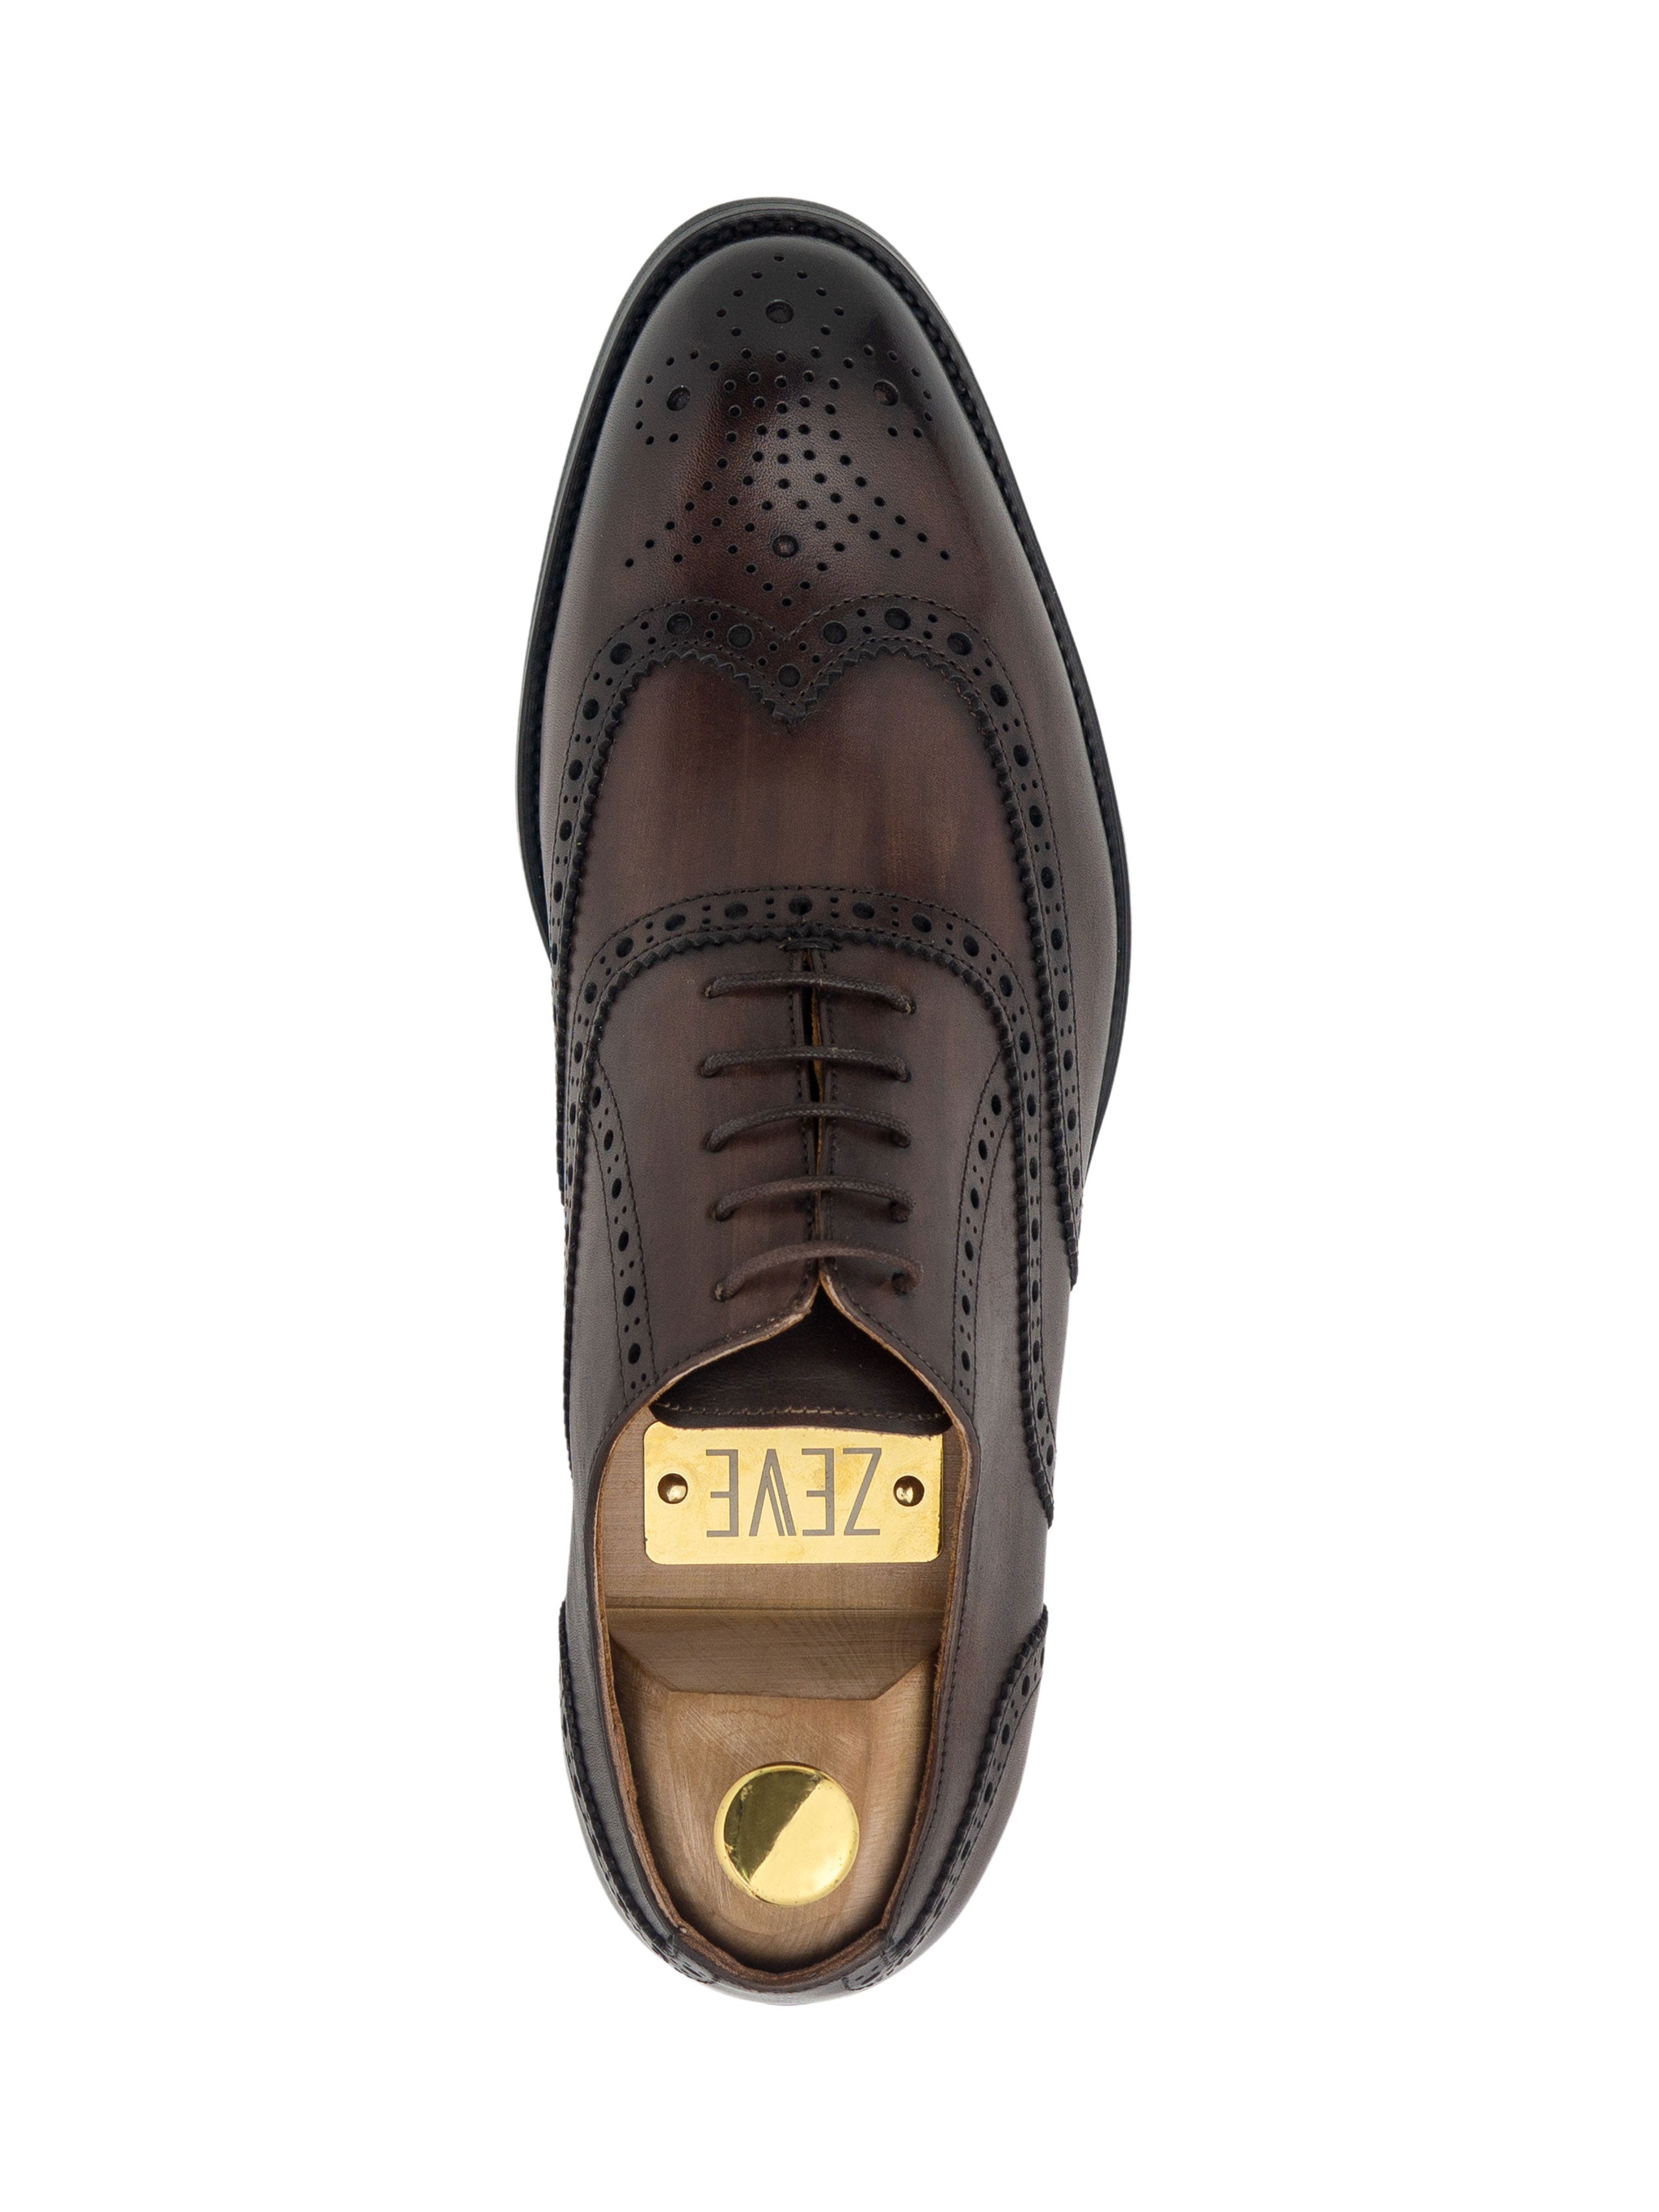 Oxford Brogue Wingtip - Dark Brown Lace Up (Hand Painted Patina) - Zeve Shoes